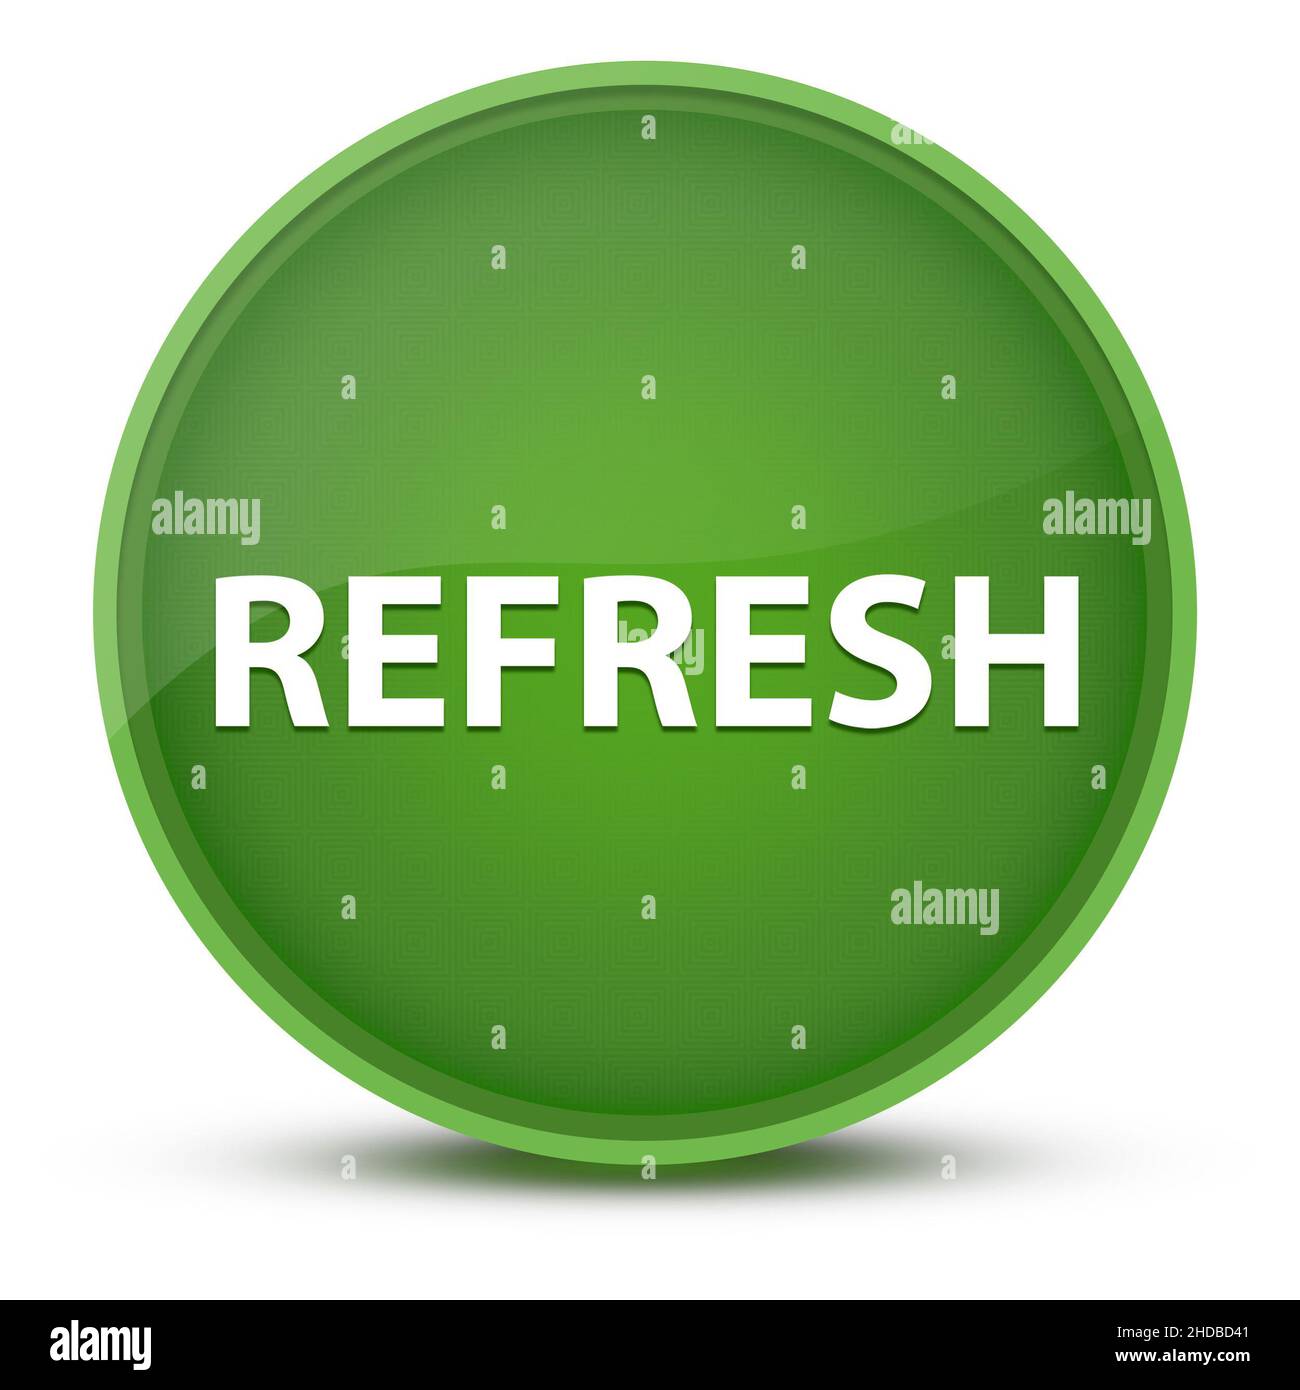 Refresh luxurious glossy green round button abstract illustration Stock Photo